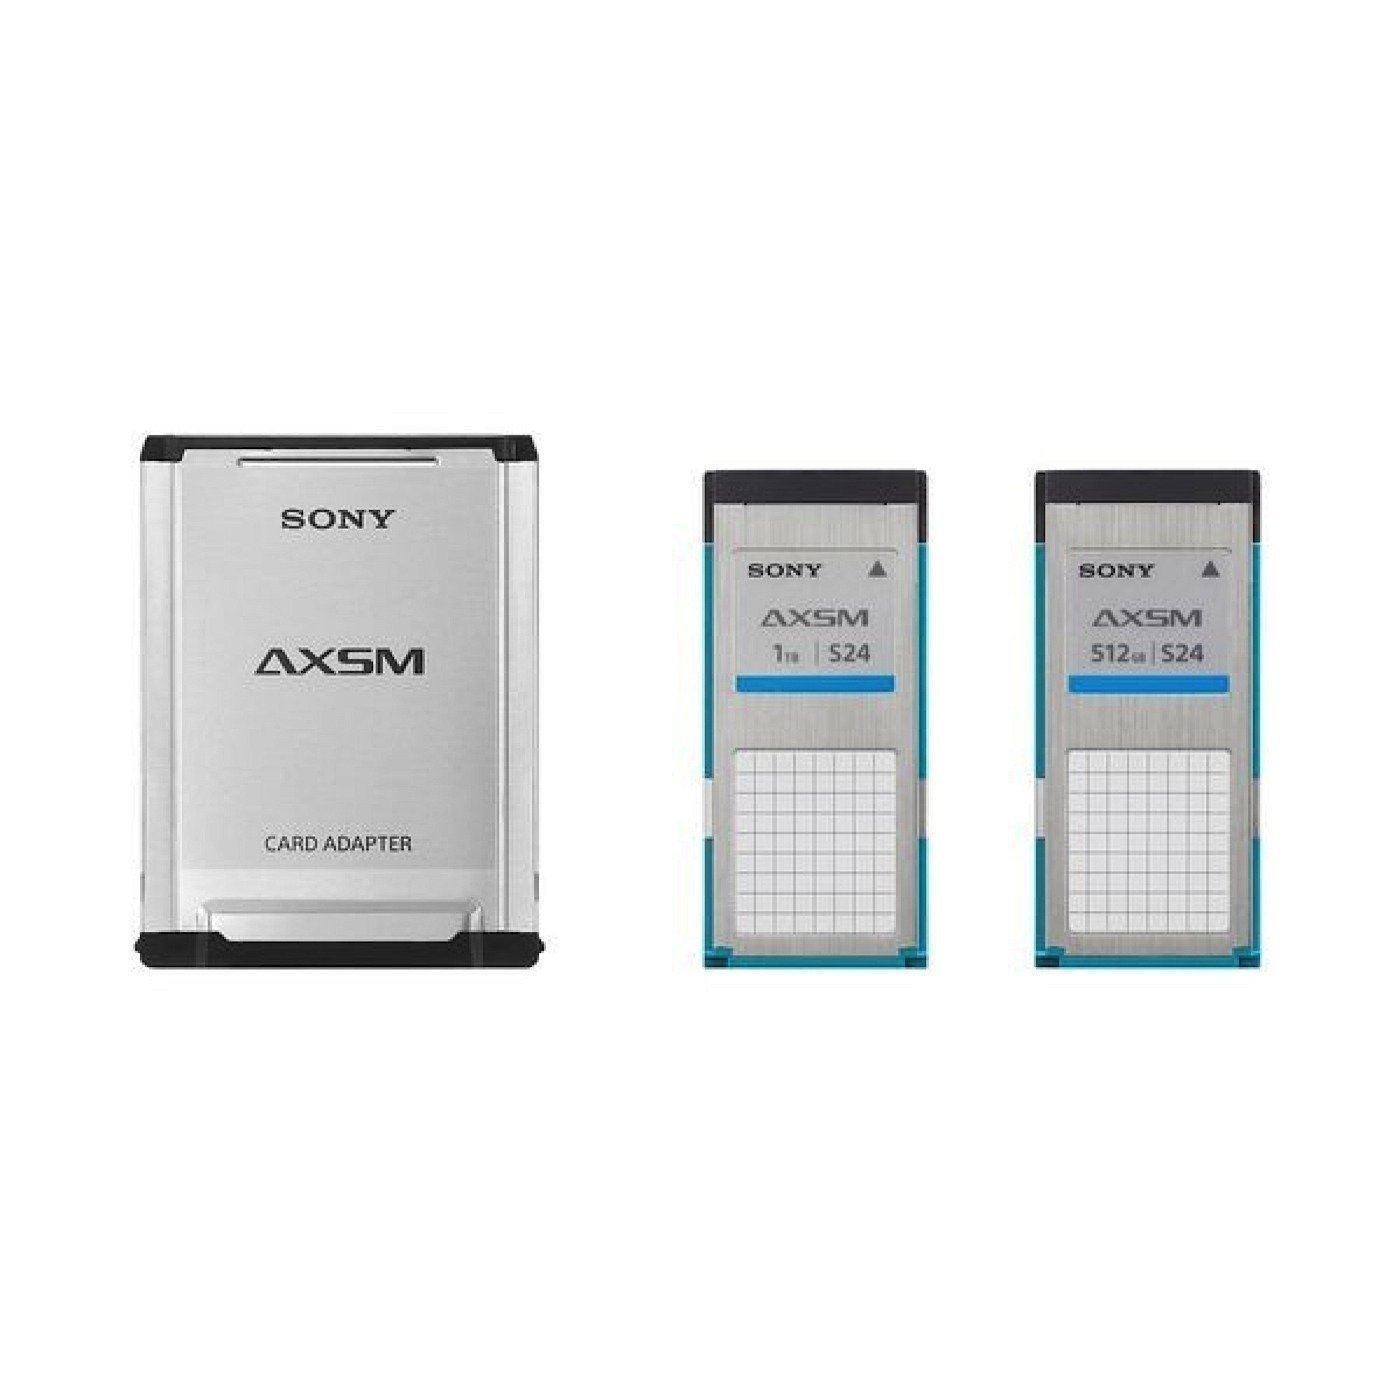 2 - Sony AXSM 512 GB Memory Cards w/USB 3.0 Card Reader Package